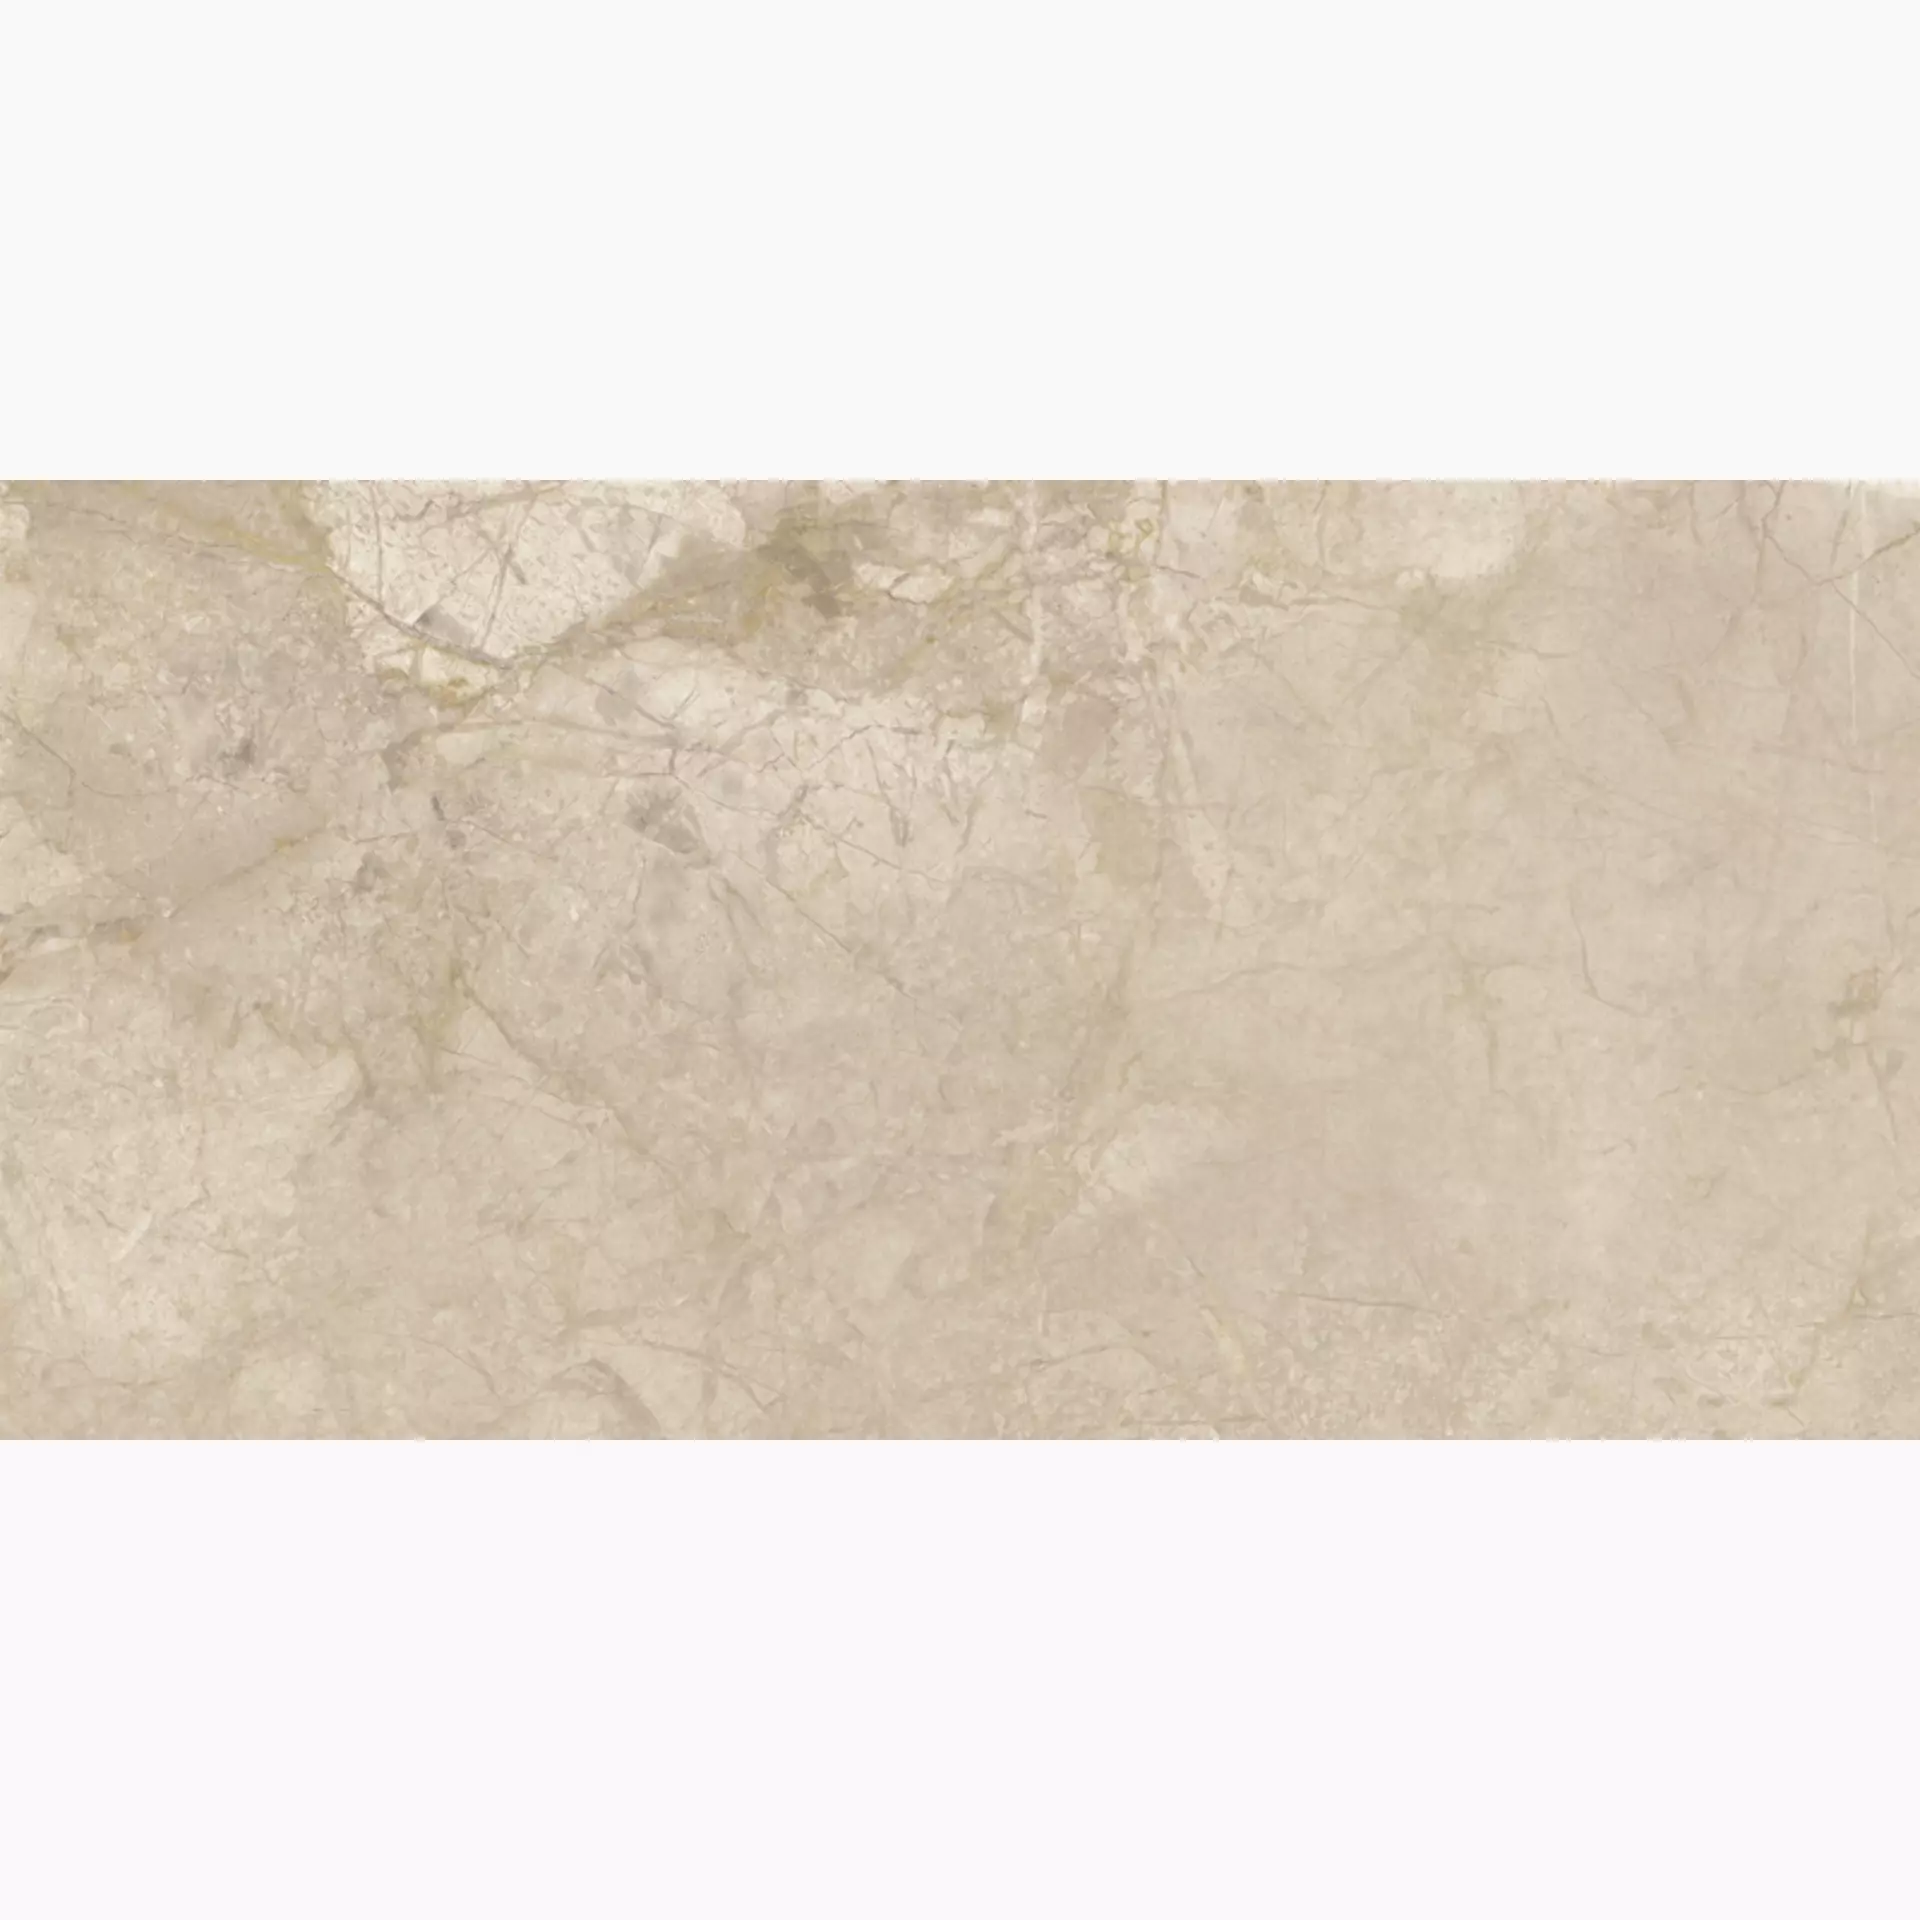 Keope Elements Lux Crema Beige Lappato 32413233 60x120cm rectified 9mm